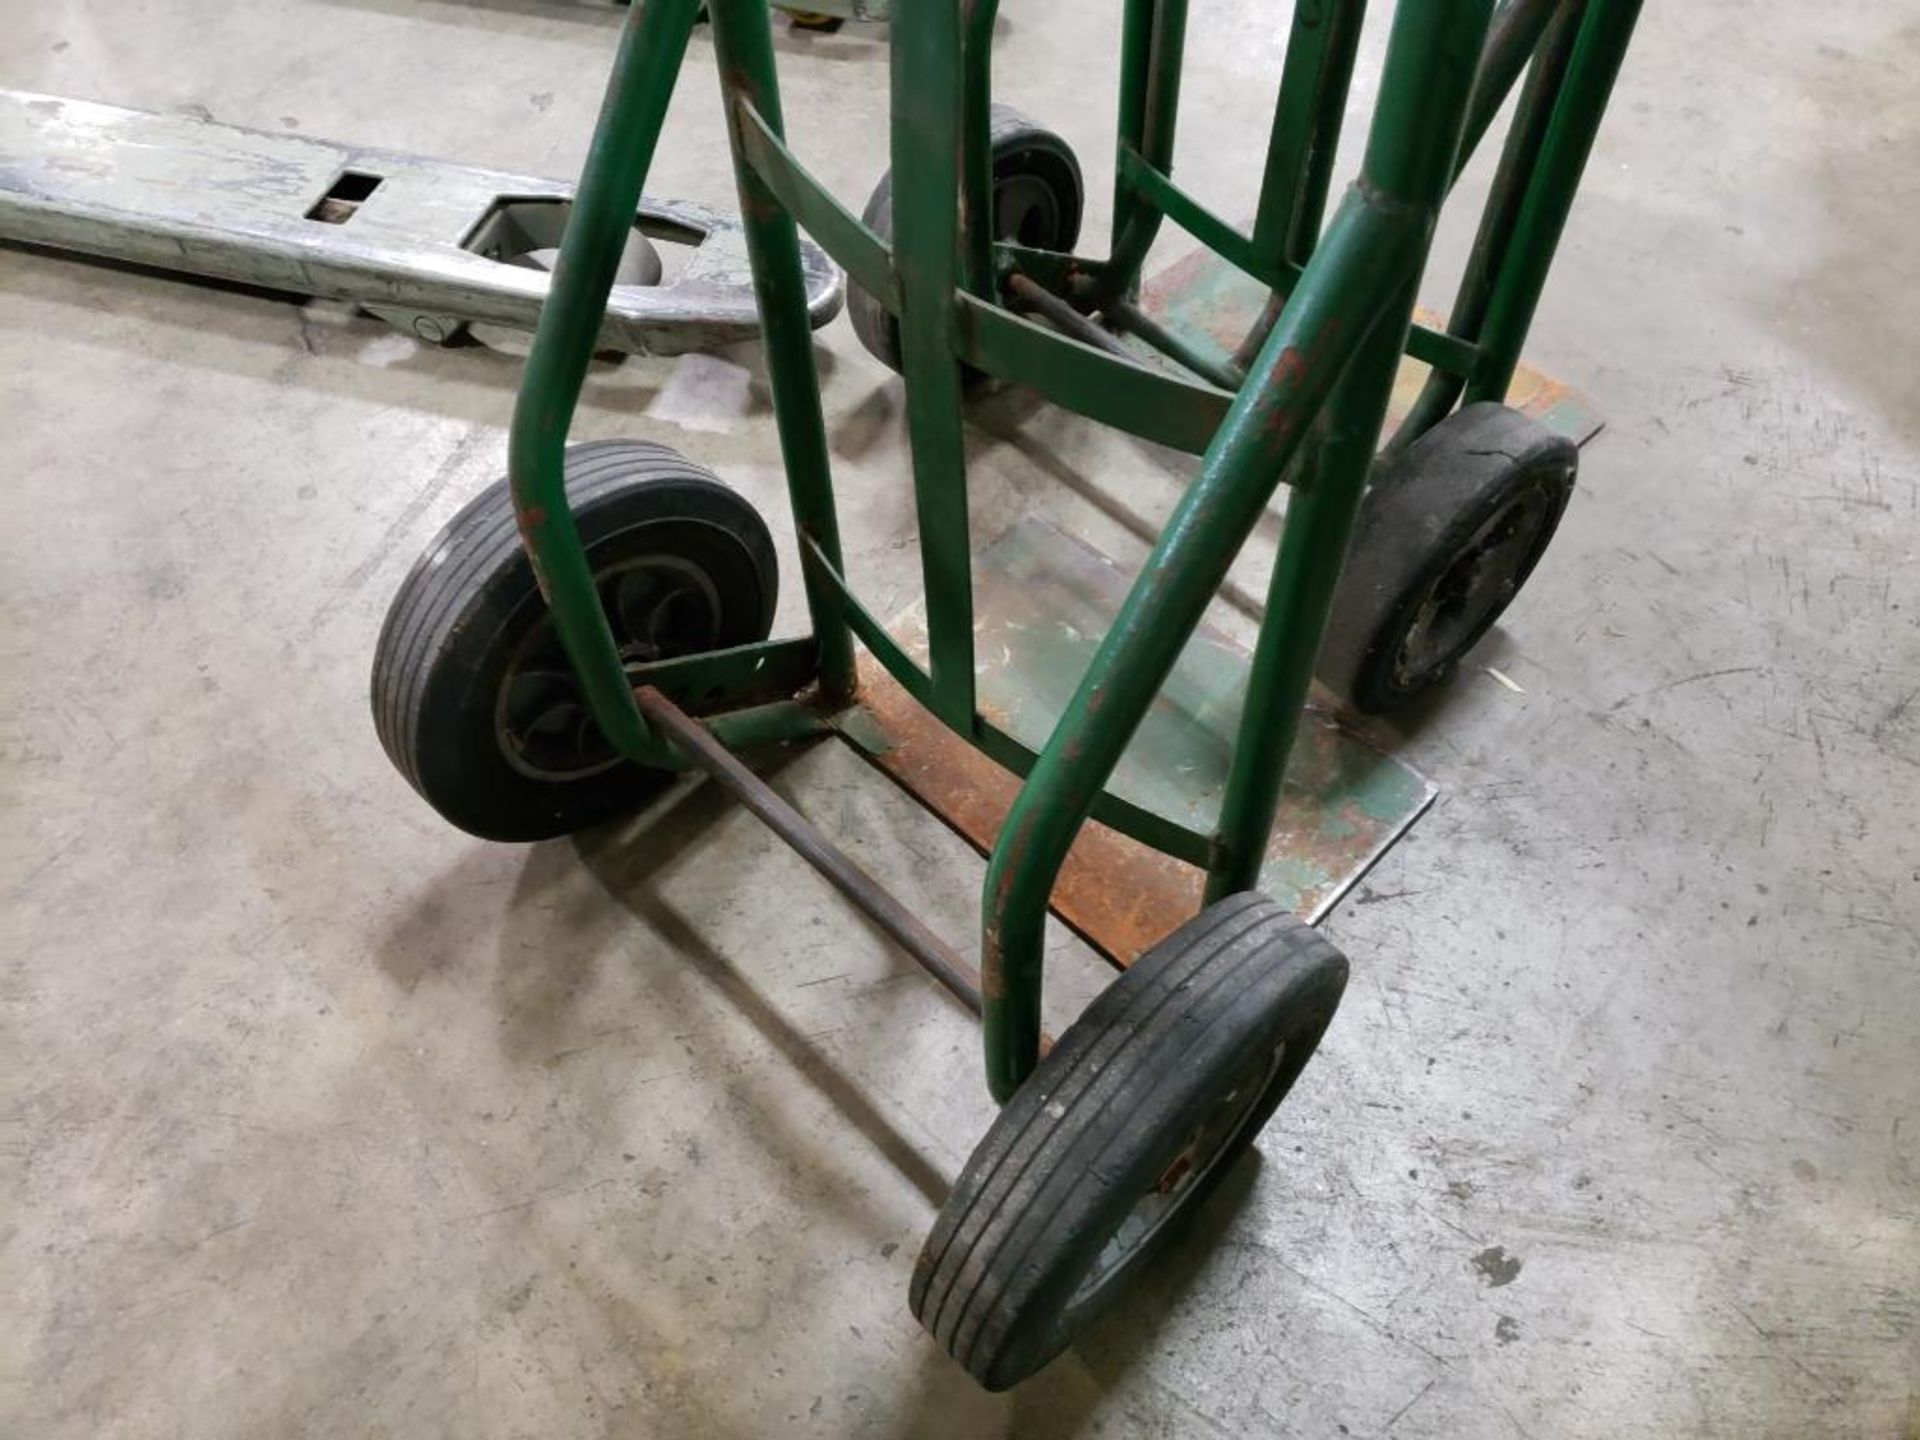 Qty 2 - Assorted hand truck. - Image 5 of 7